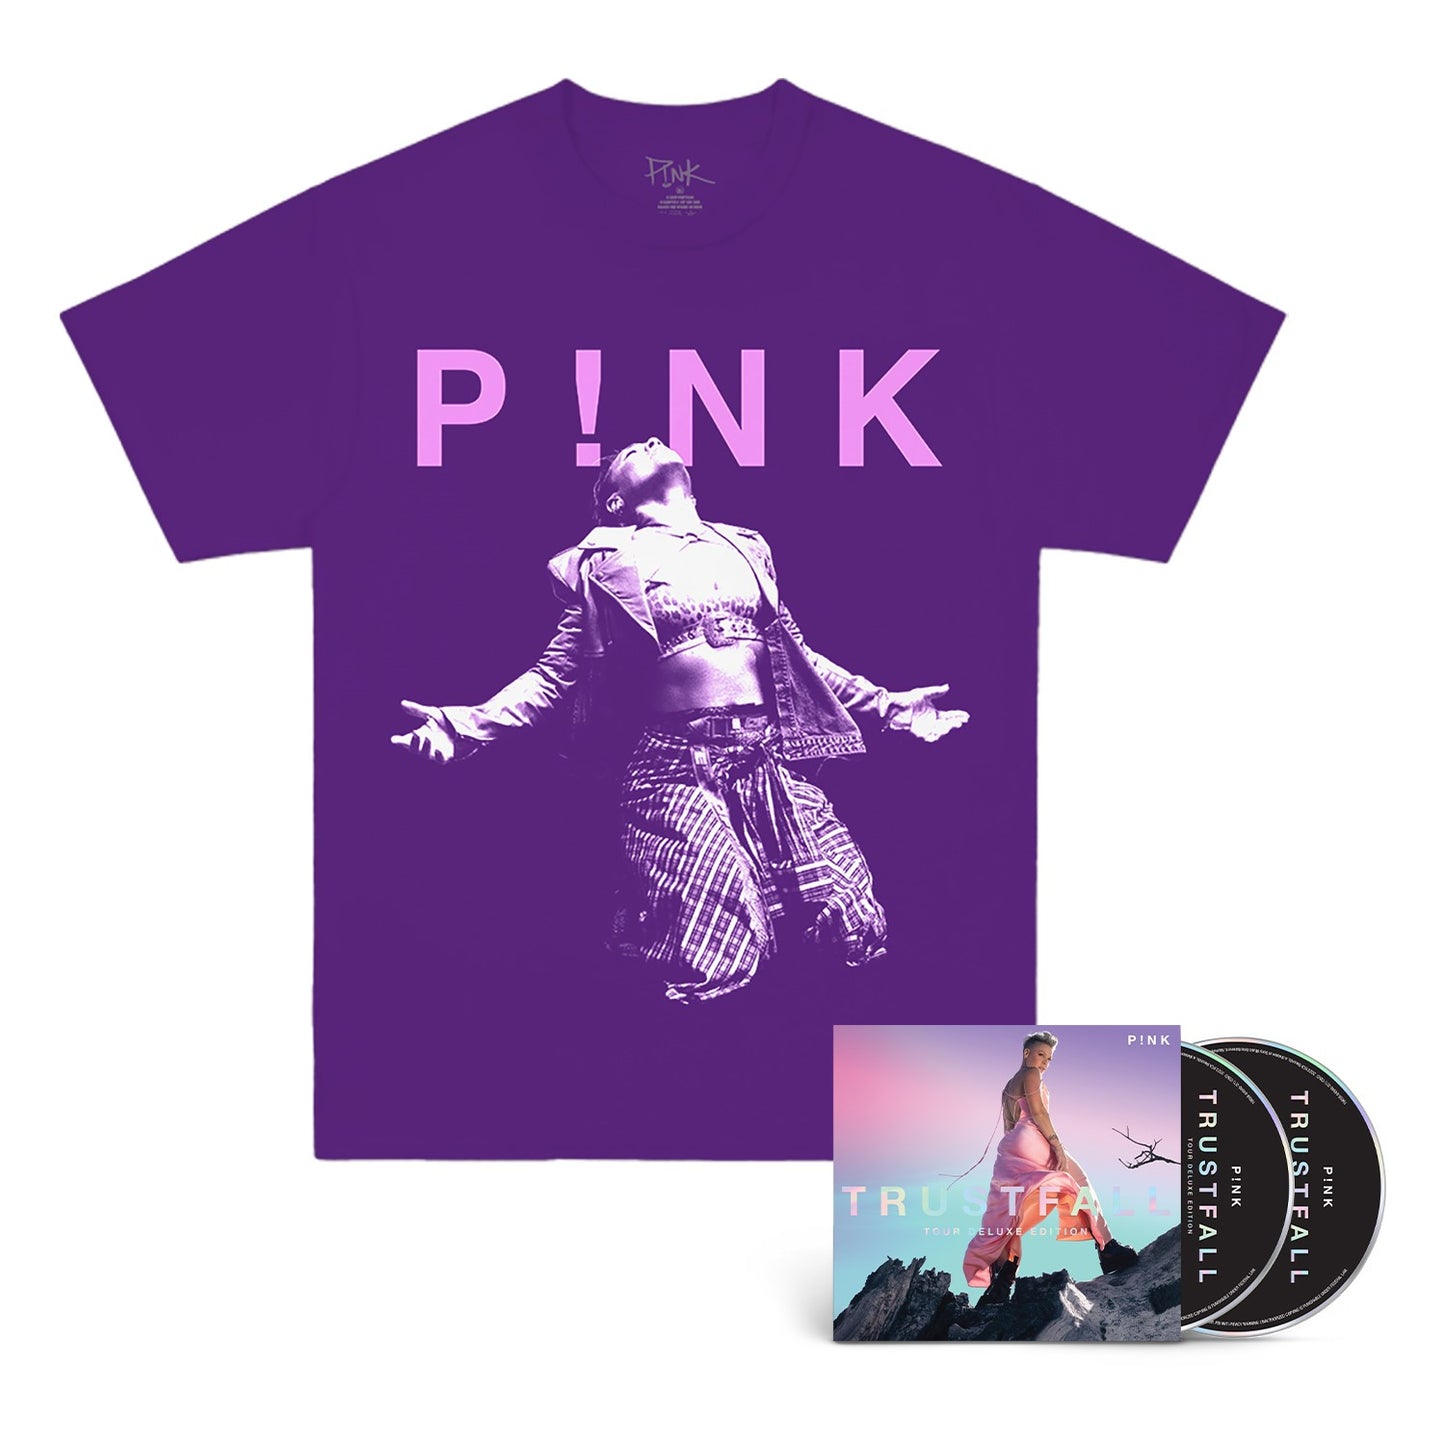 TRUSTFALL TOUR DELUXE EDITION 2CD + T-SHIRT